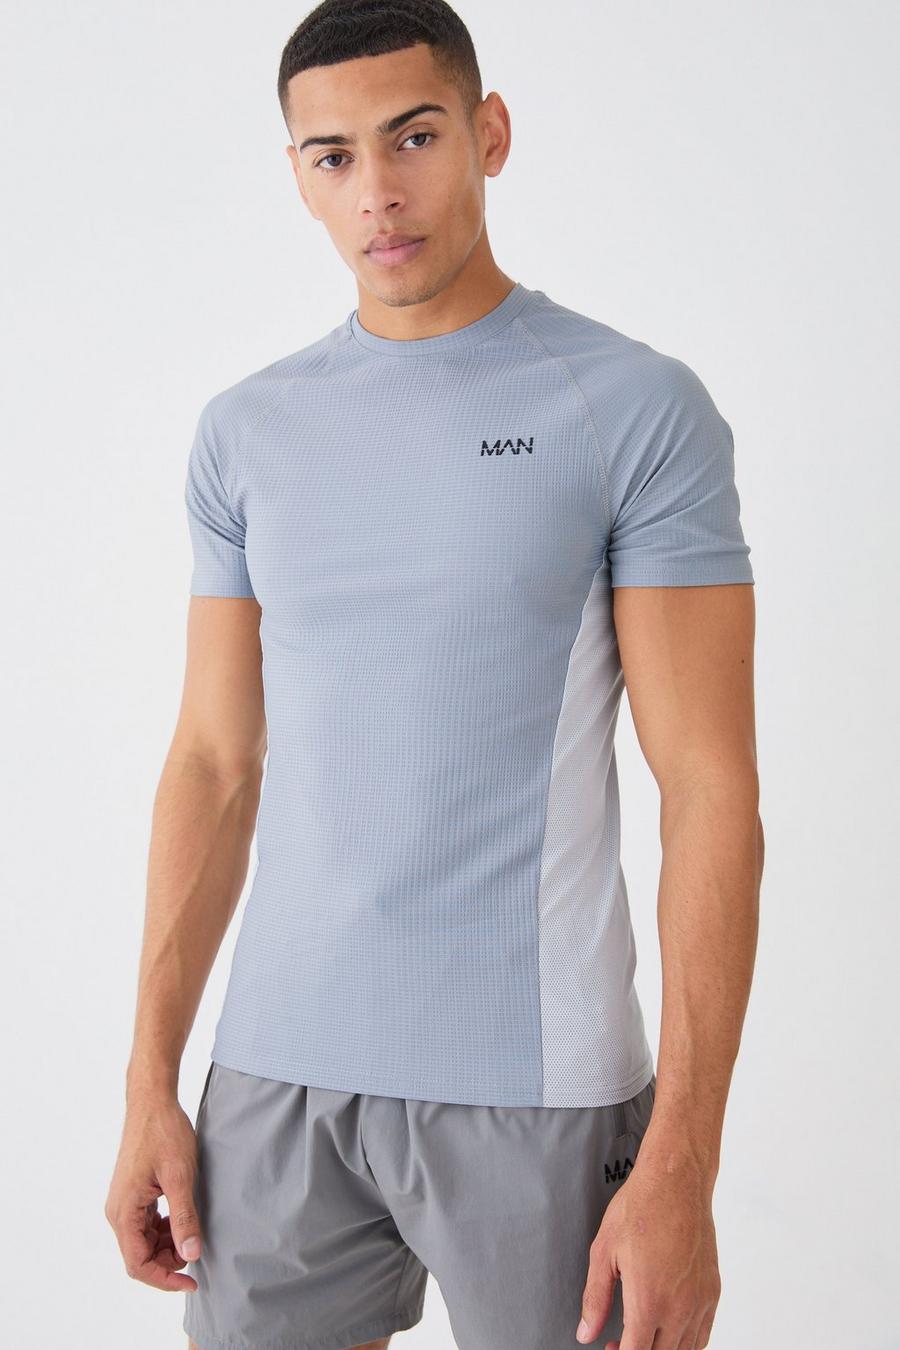 Man Active Muscle Fit Colorblock T-Shirt, Charcoal